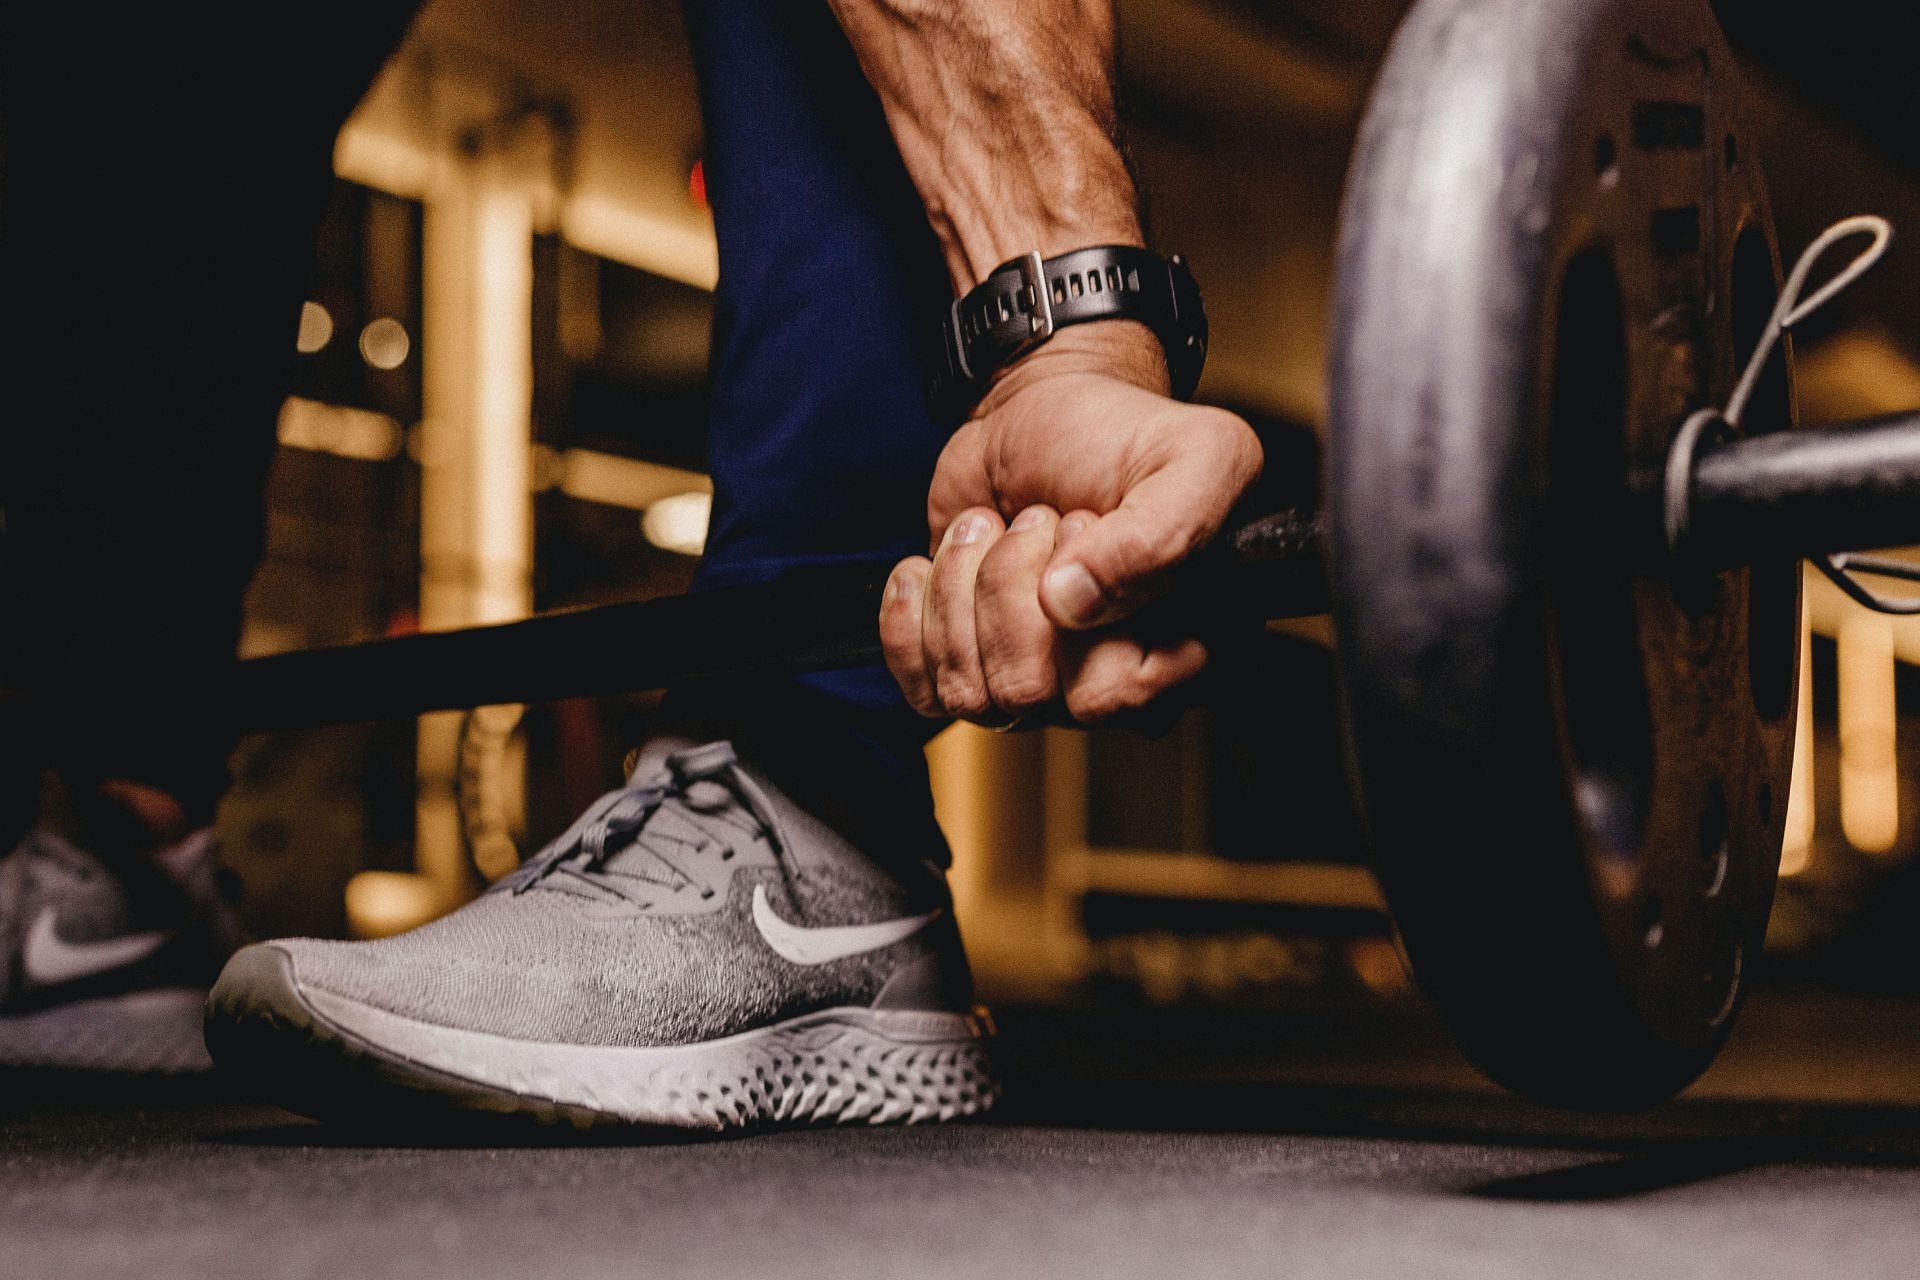 Can 15 minutes of workout change your health for the better? (Image via unsplash/ Jonathan Borba)